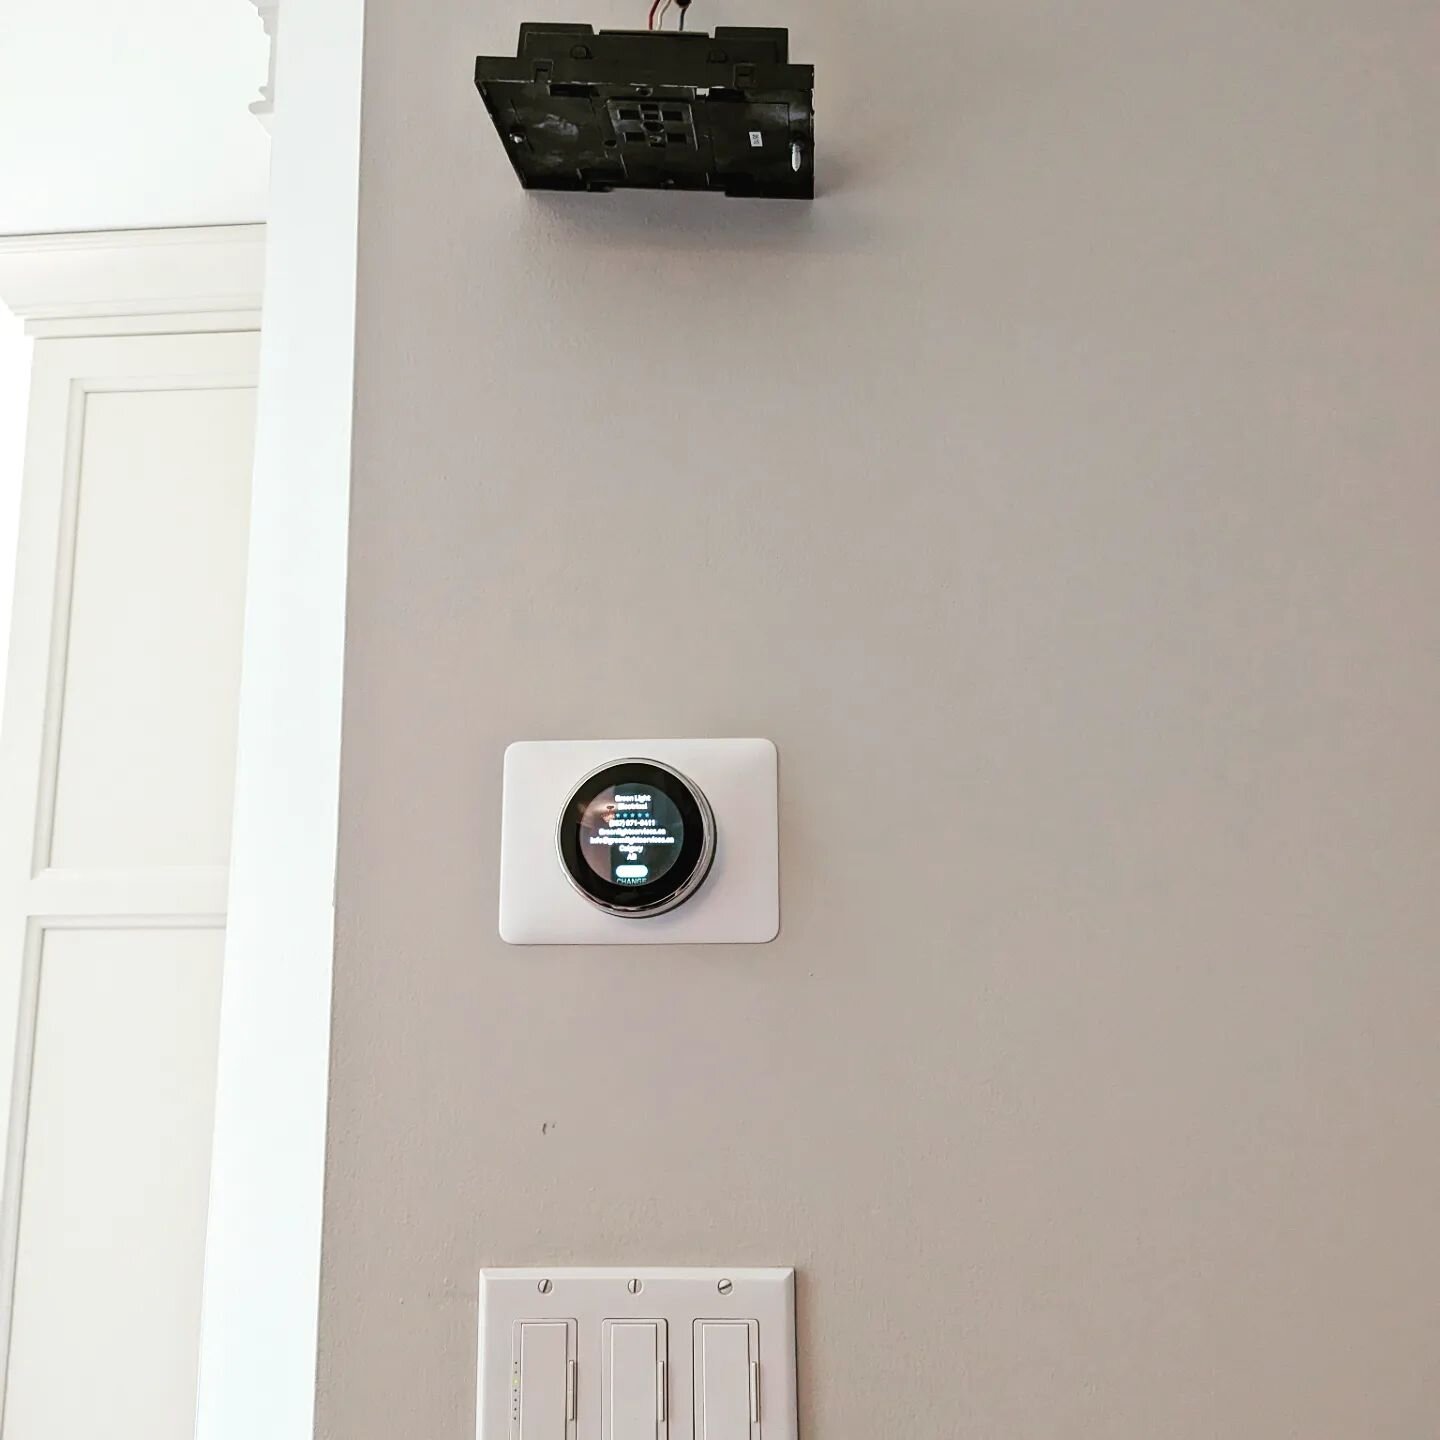 Google Nest Smart Thermostat @greenlight.ca

Can't wait to see what happens Nest! 

* Common wire power connector 
* Identify wiring 
* Tested for functionally 

Greenlight Electrical Services ltd.
Your local GoogleNest pro if youre having trouble we